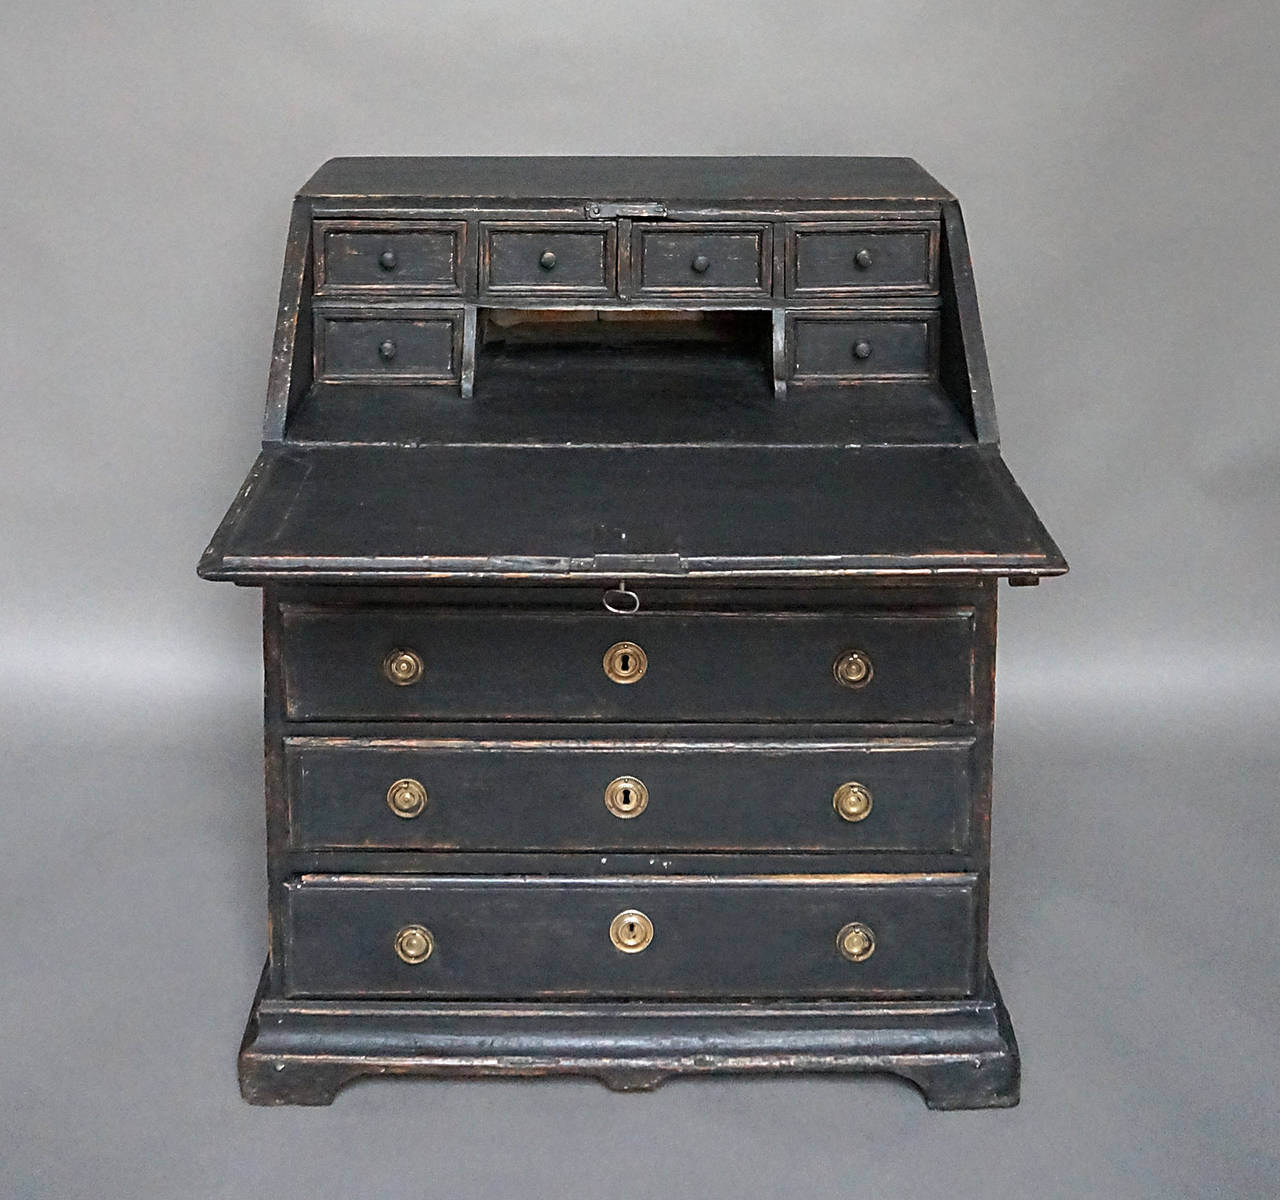 Early Swedish slant front writing desk, circa 1760, in a small size. Four full width drawers below the writing surface, and six small drawers inside, all on a shaped bracket base. Original brass hardware.